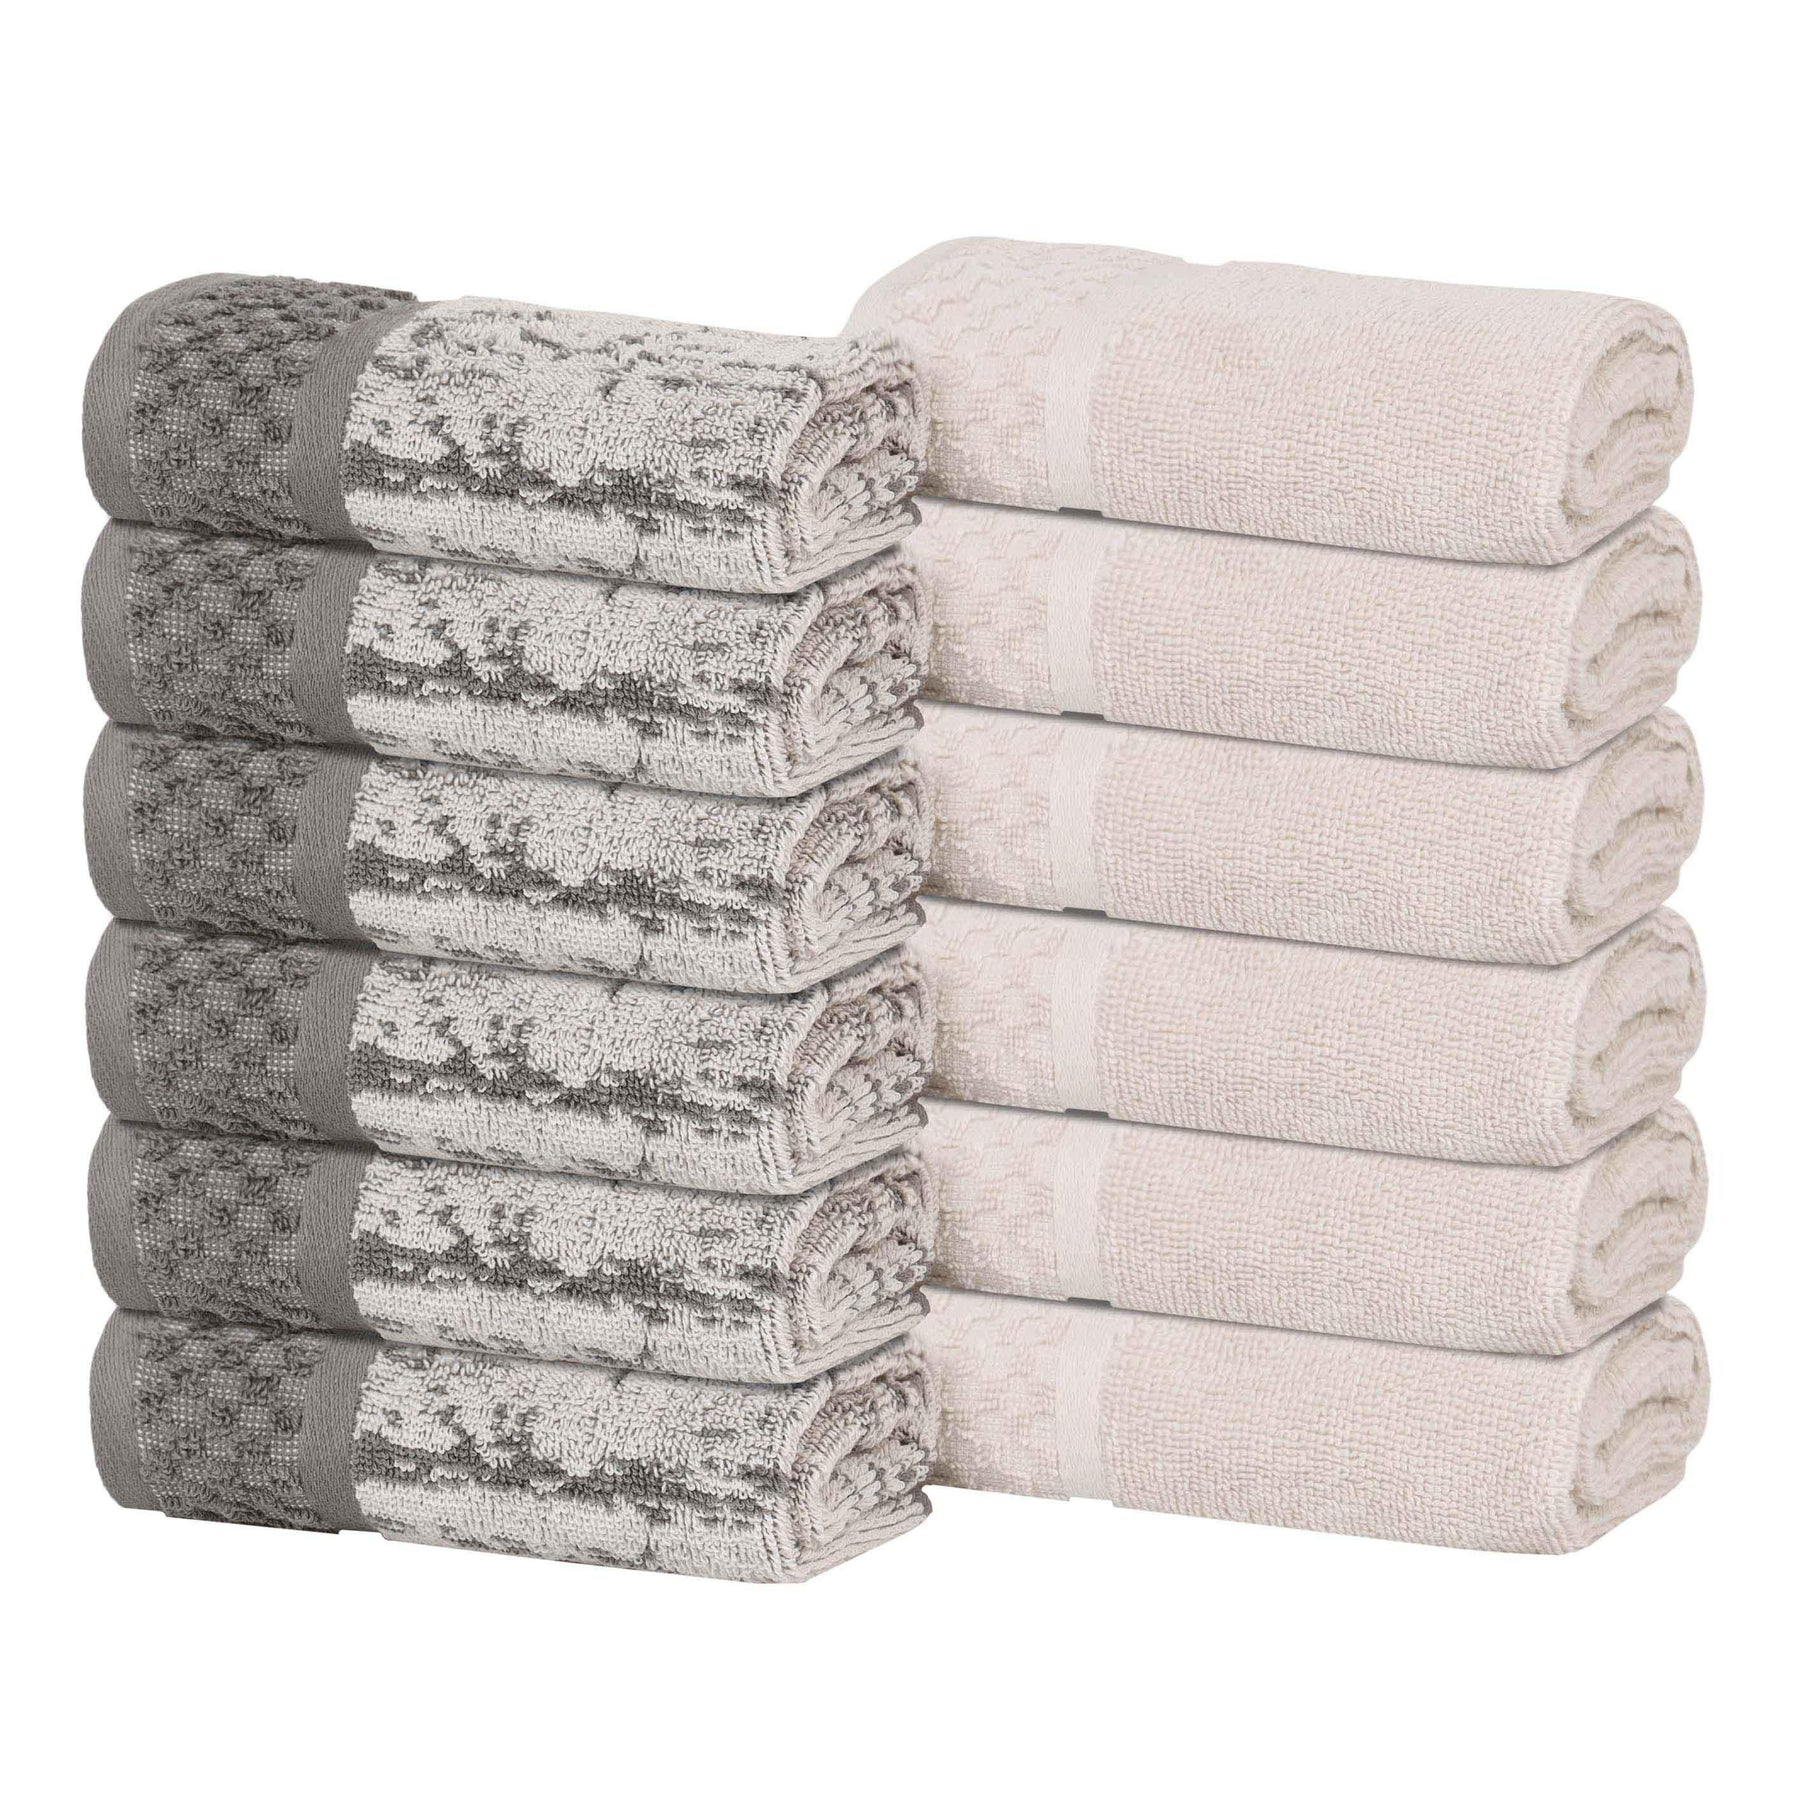 Lodie Cotton Jacquard Solid and Two-Toned Face Towel Washcloth Set of 12 - Face Towel by Superior - Superior 